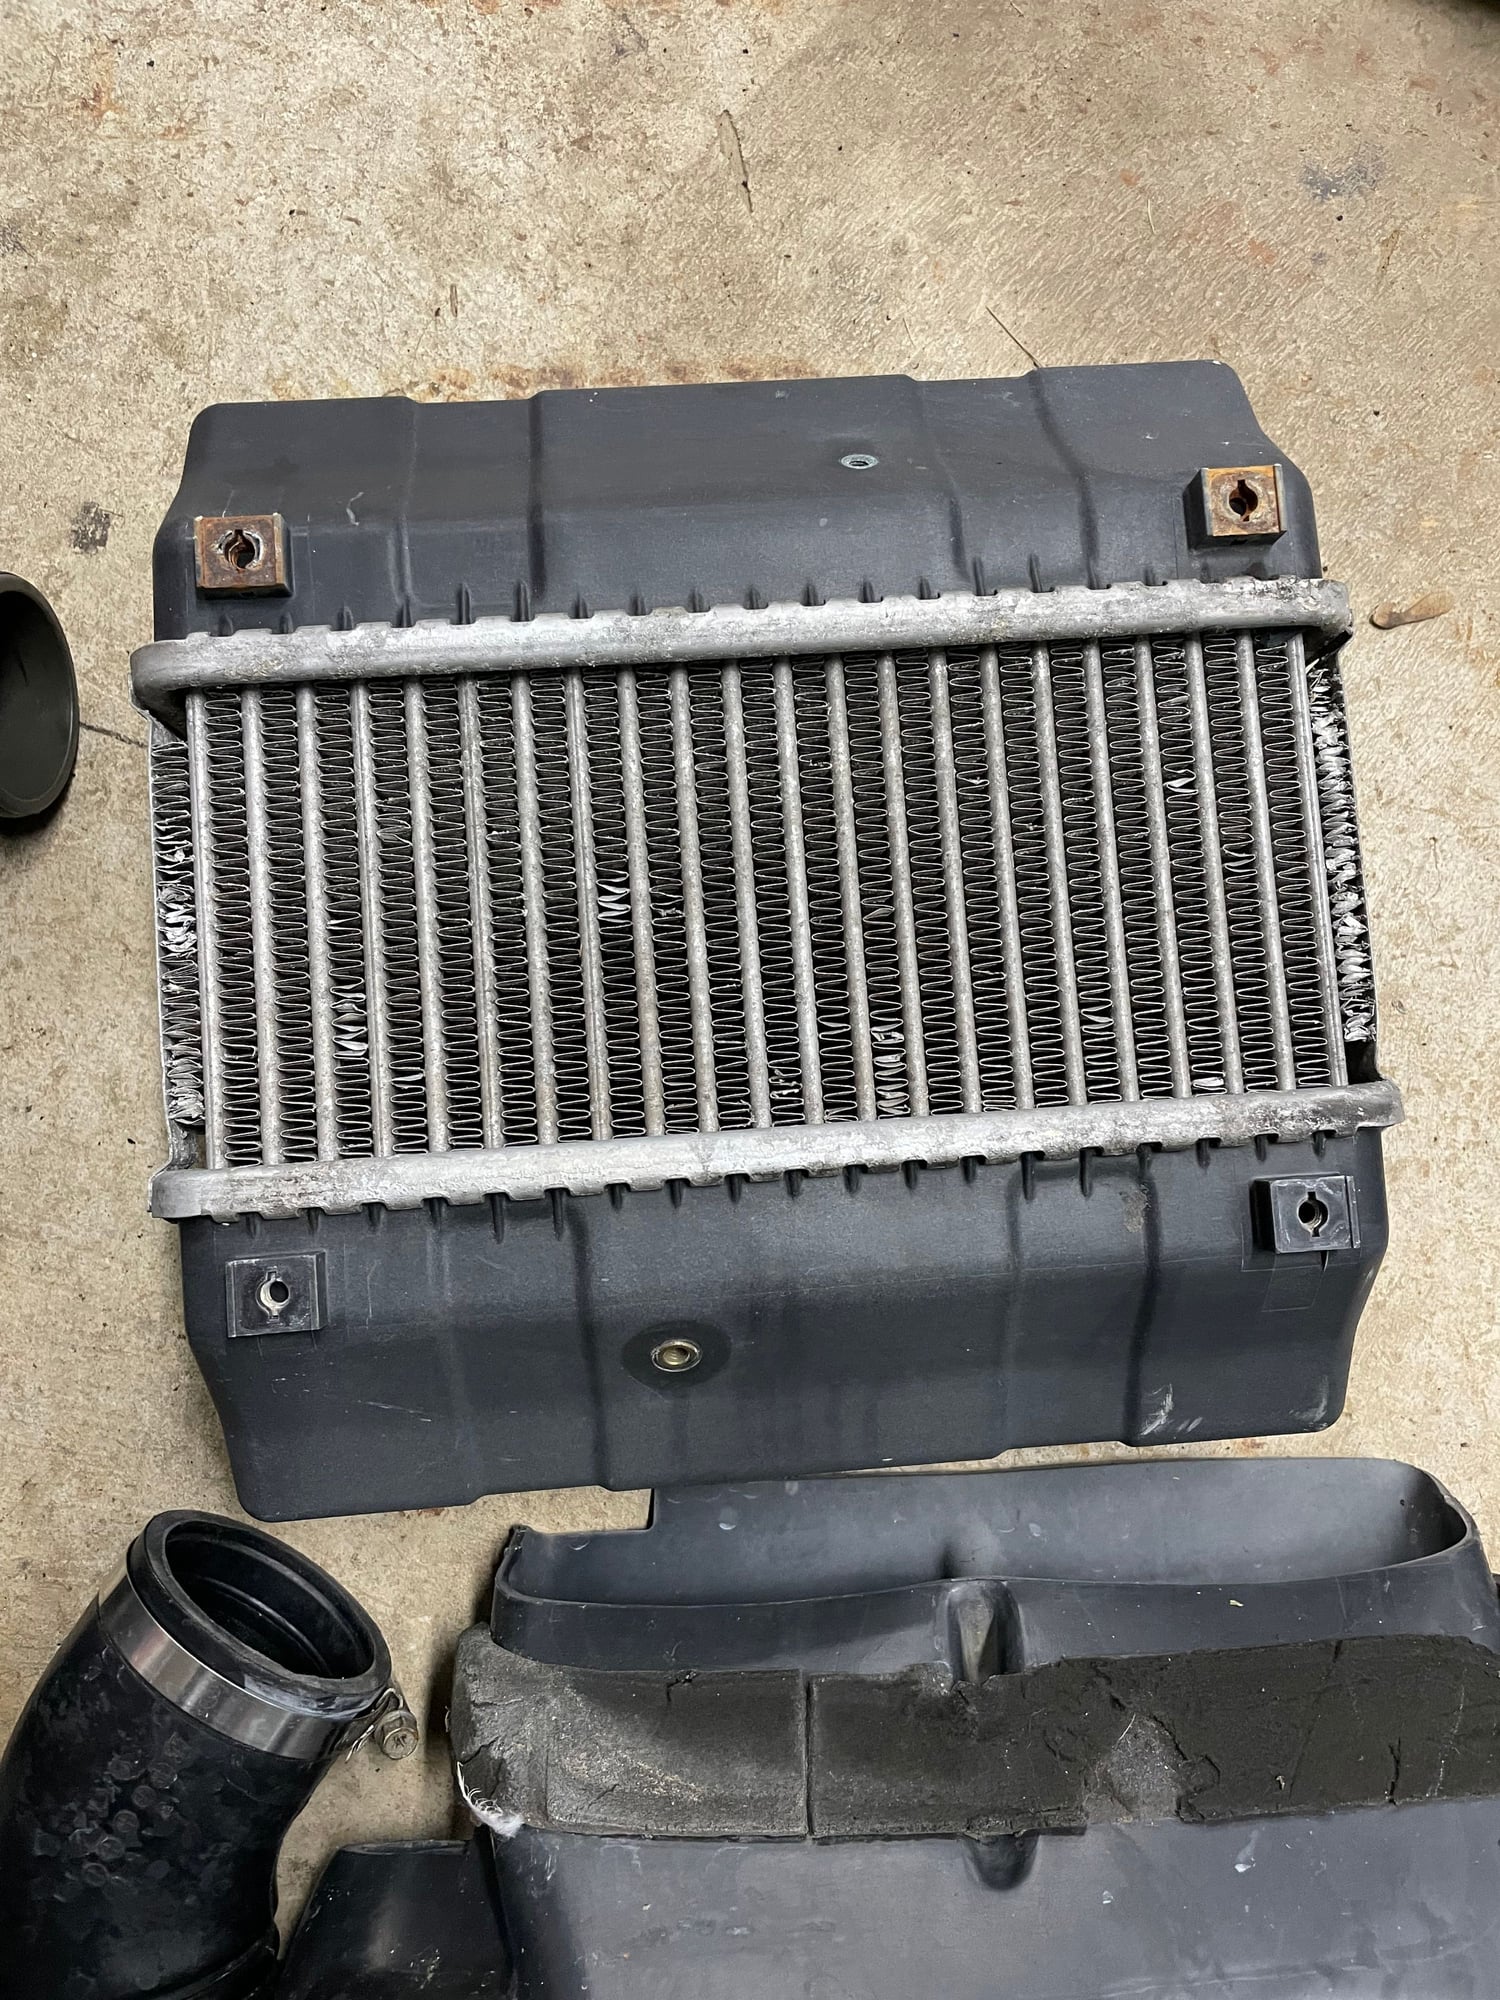 Engine - Intake/Fuel - OEM Intercooler with duct and piping. - Used - 2002 Mazda RX-7 - State College, PA 16801, United States